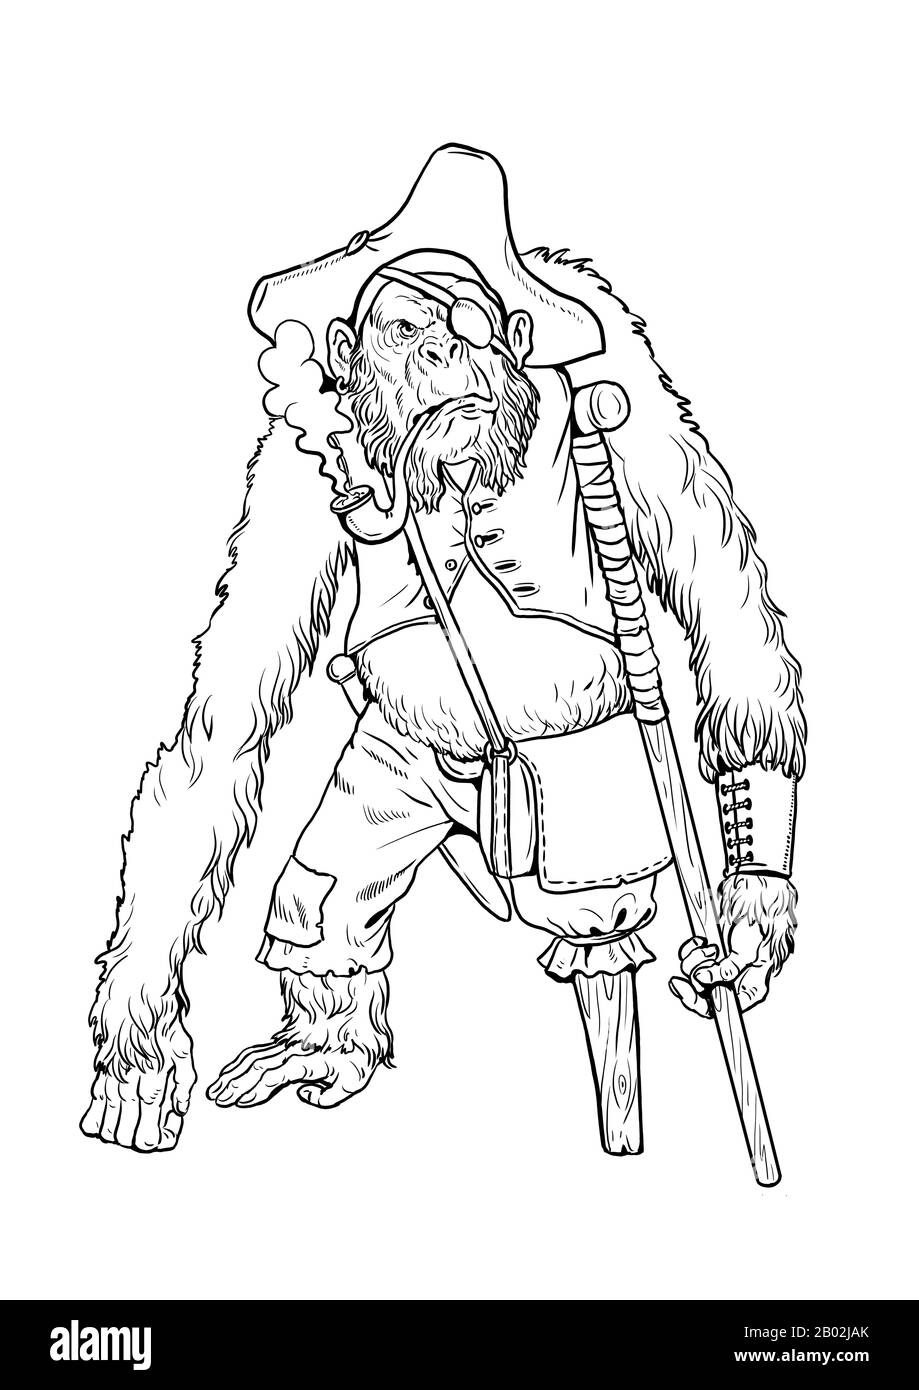 Chimpanzee pirate coloring page. Outline illustration. Monkey and apes pirates coloring sheet. Stock Photo